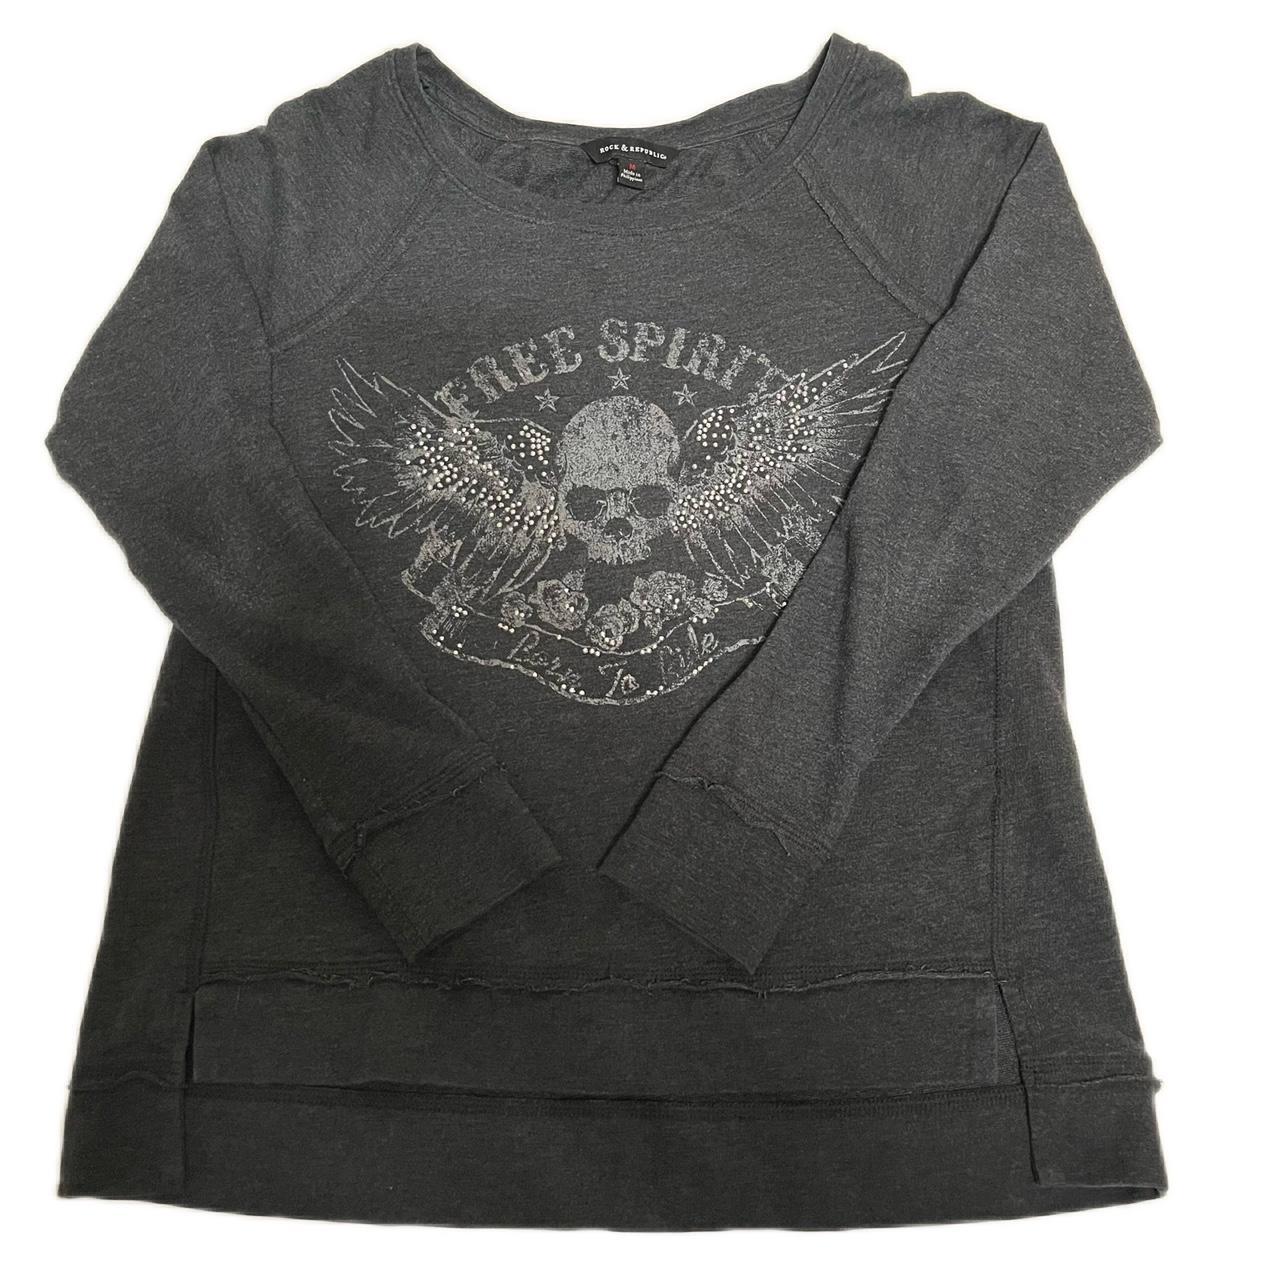 Rock and Republic Women's Grey and White Shirt (2)